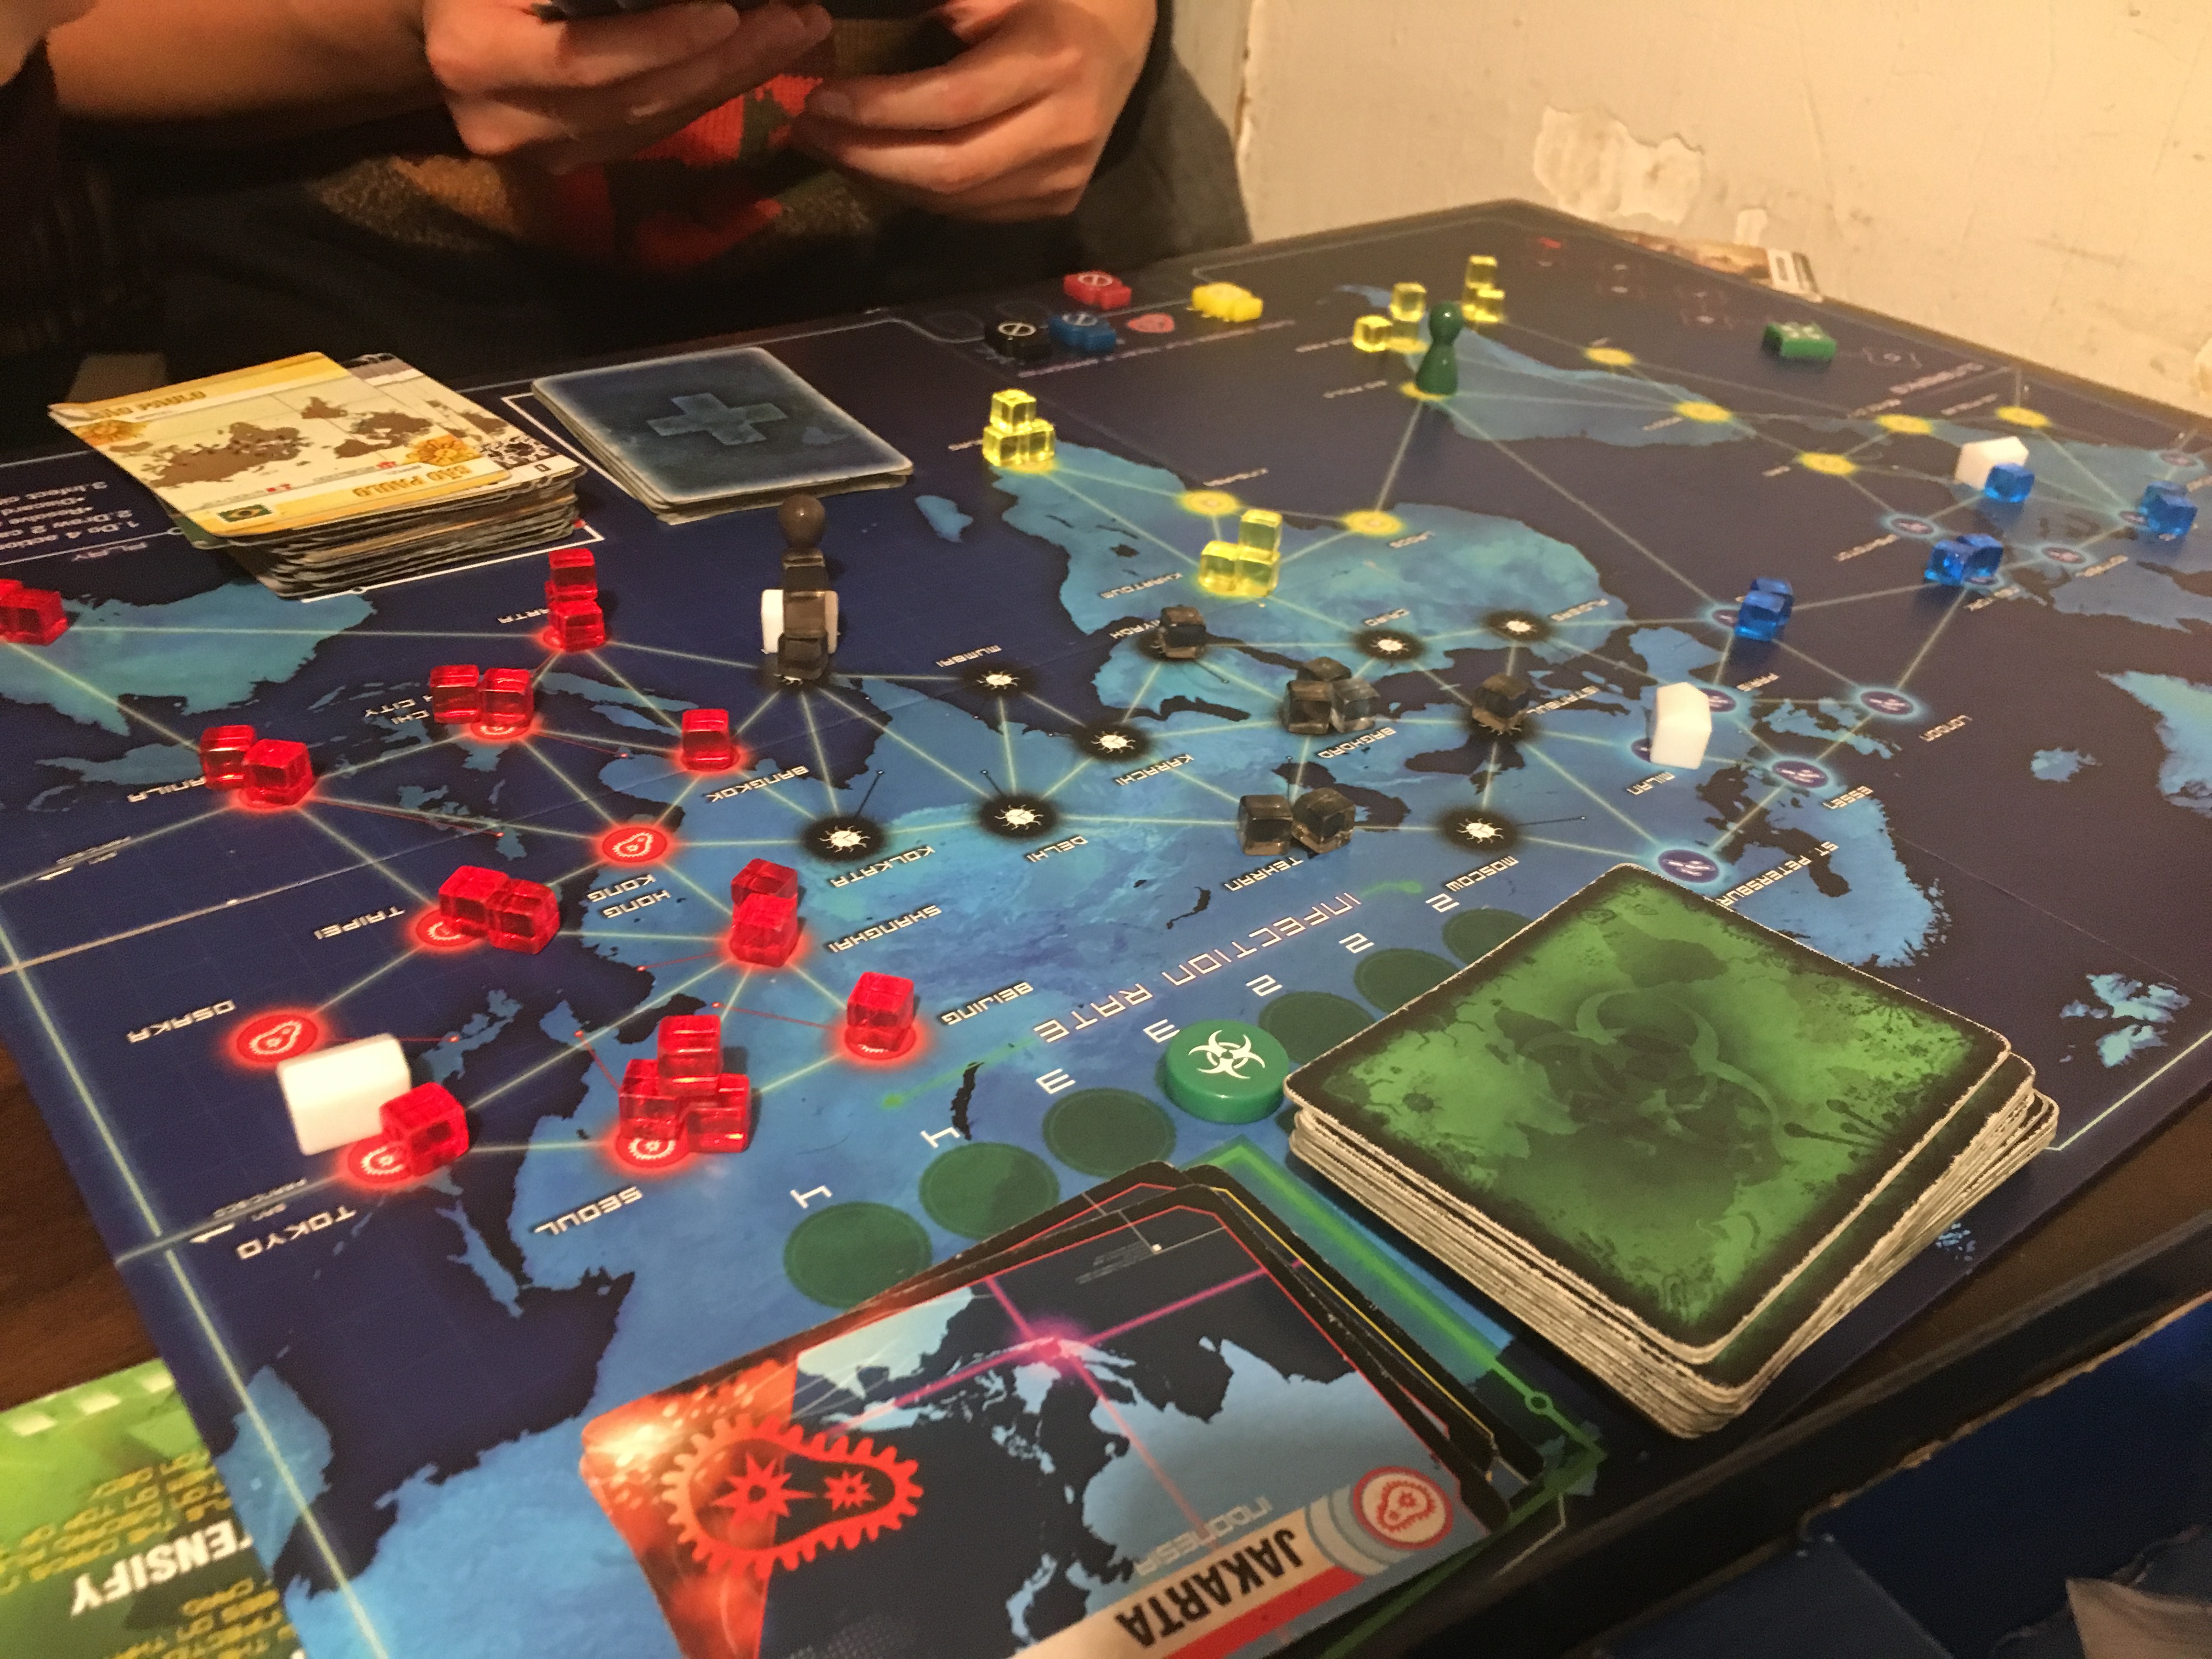 The game 'Pandemic' in progress. Designed by Matt Leacock, this game pits players against the board as they race to cure the world of several deadly diseases.